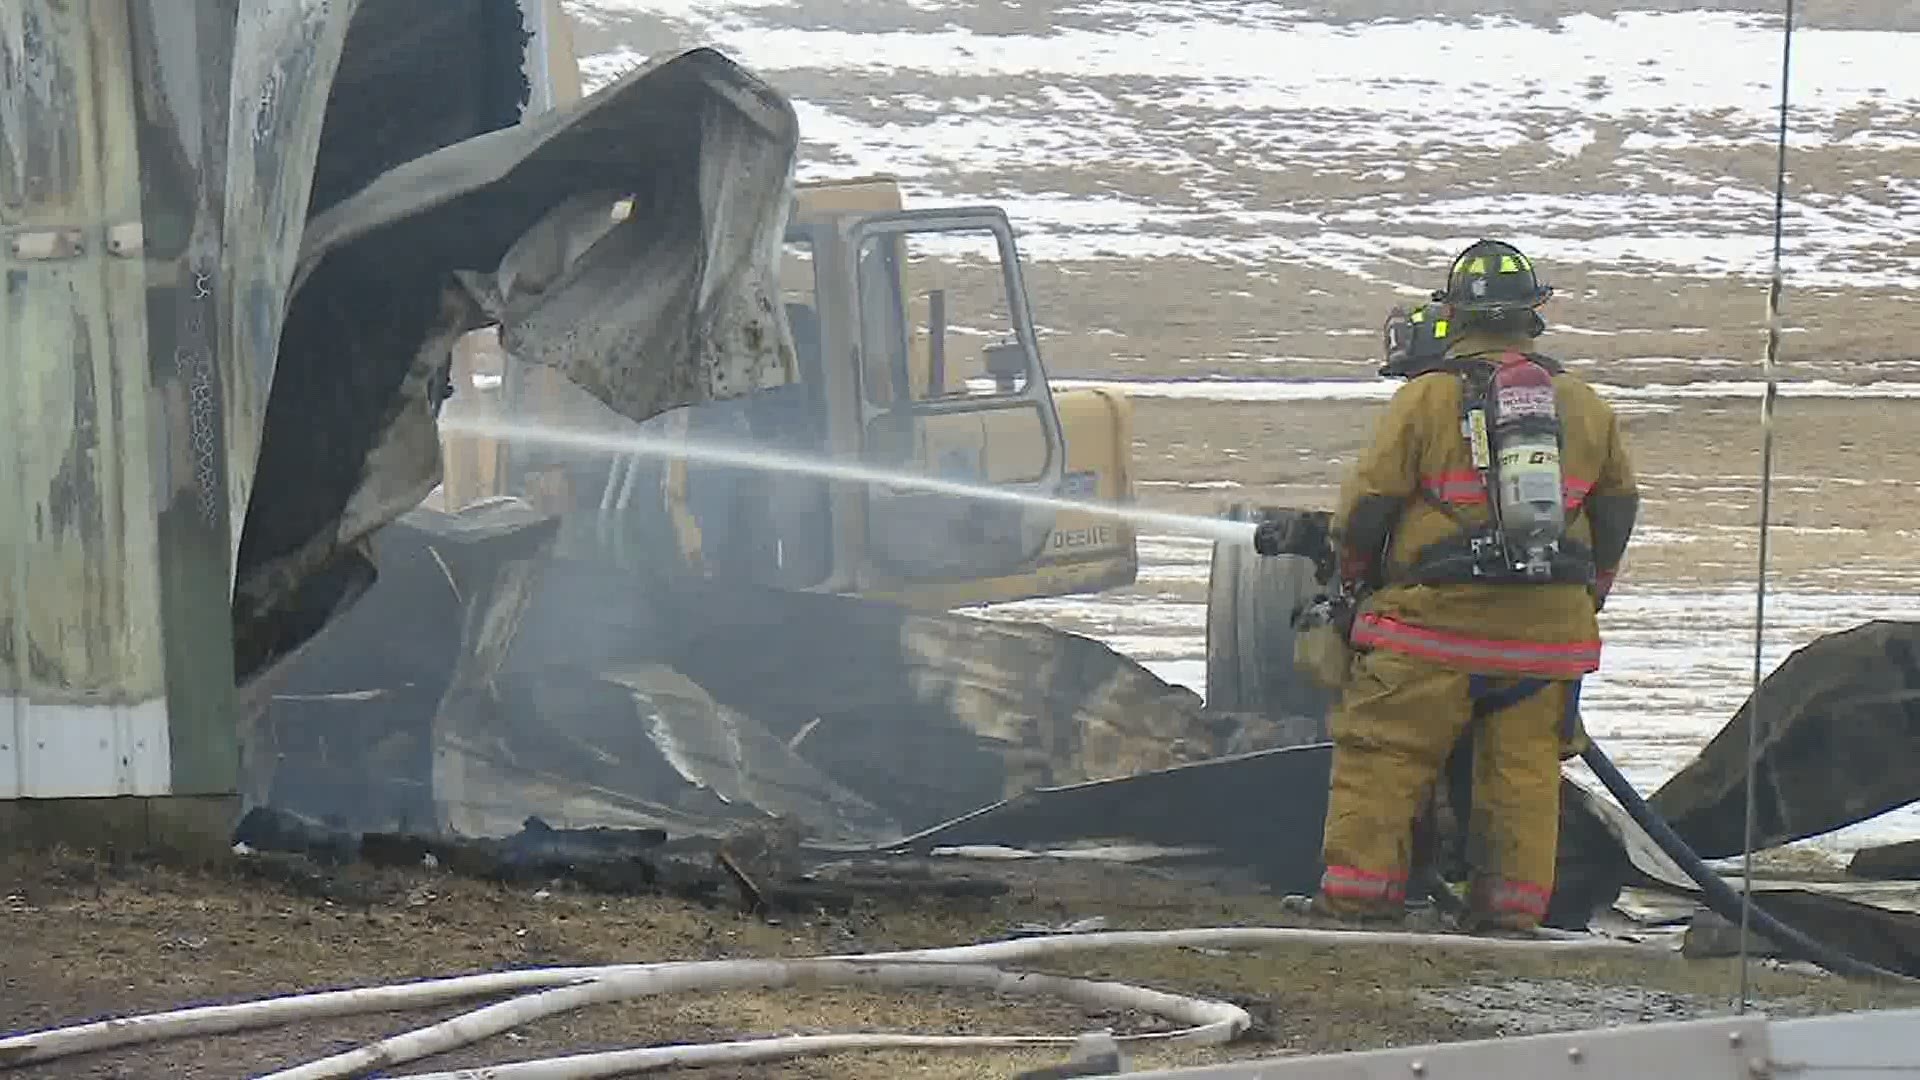 The storage building near Prompton caught fire Monday afternoon.